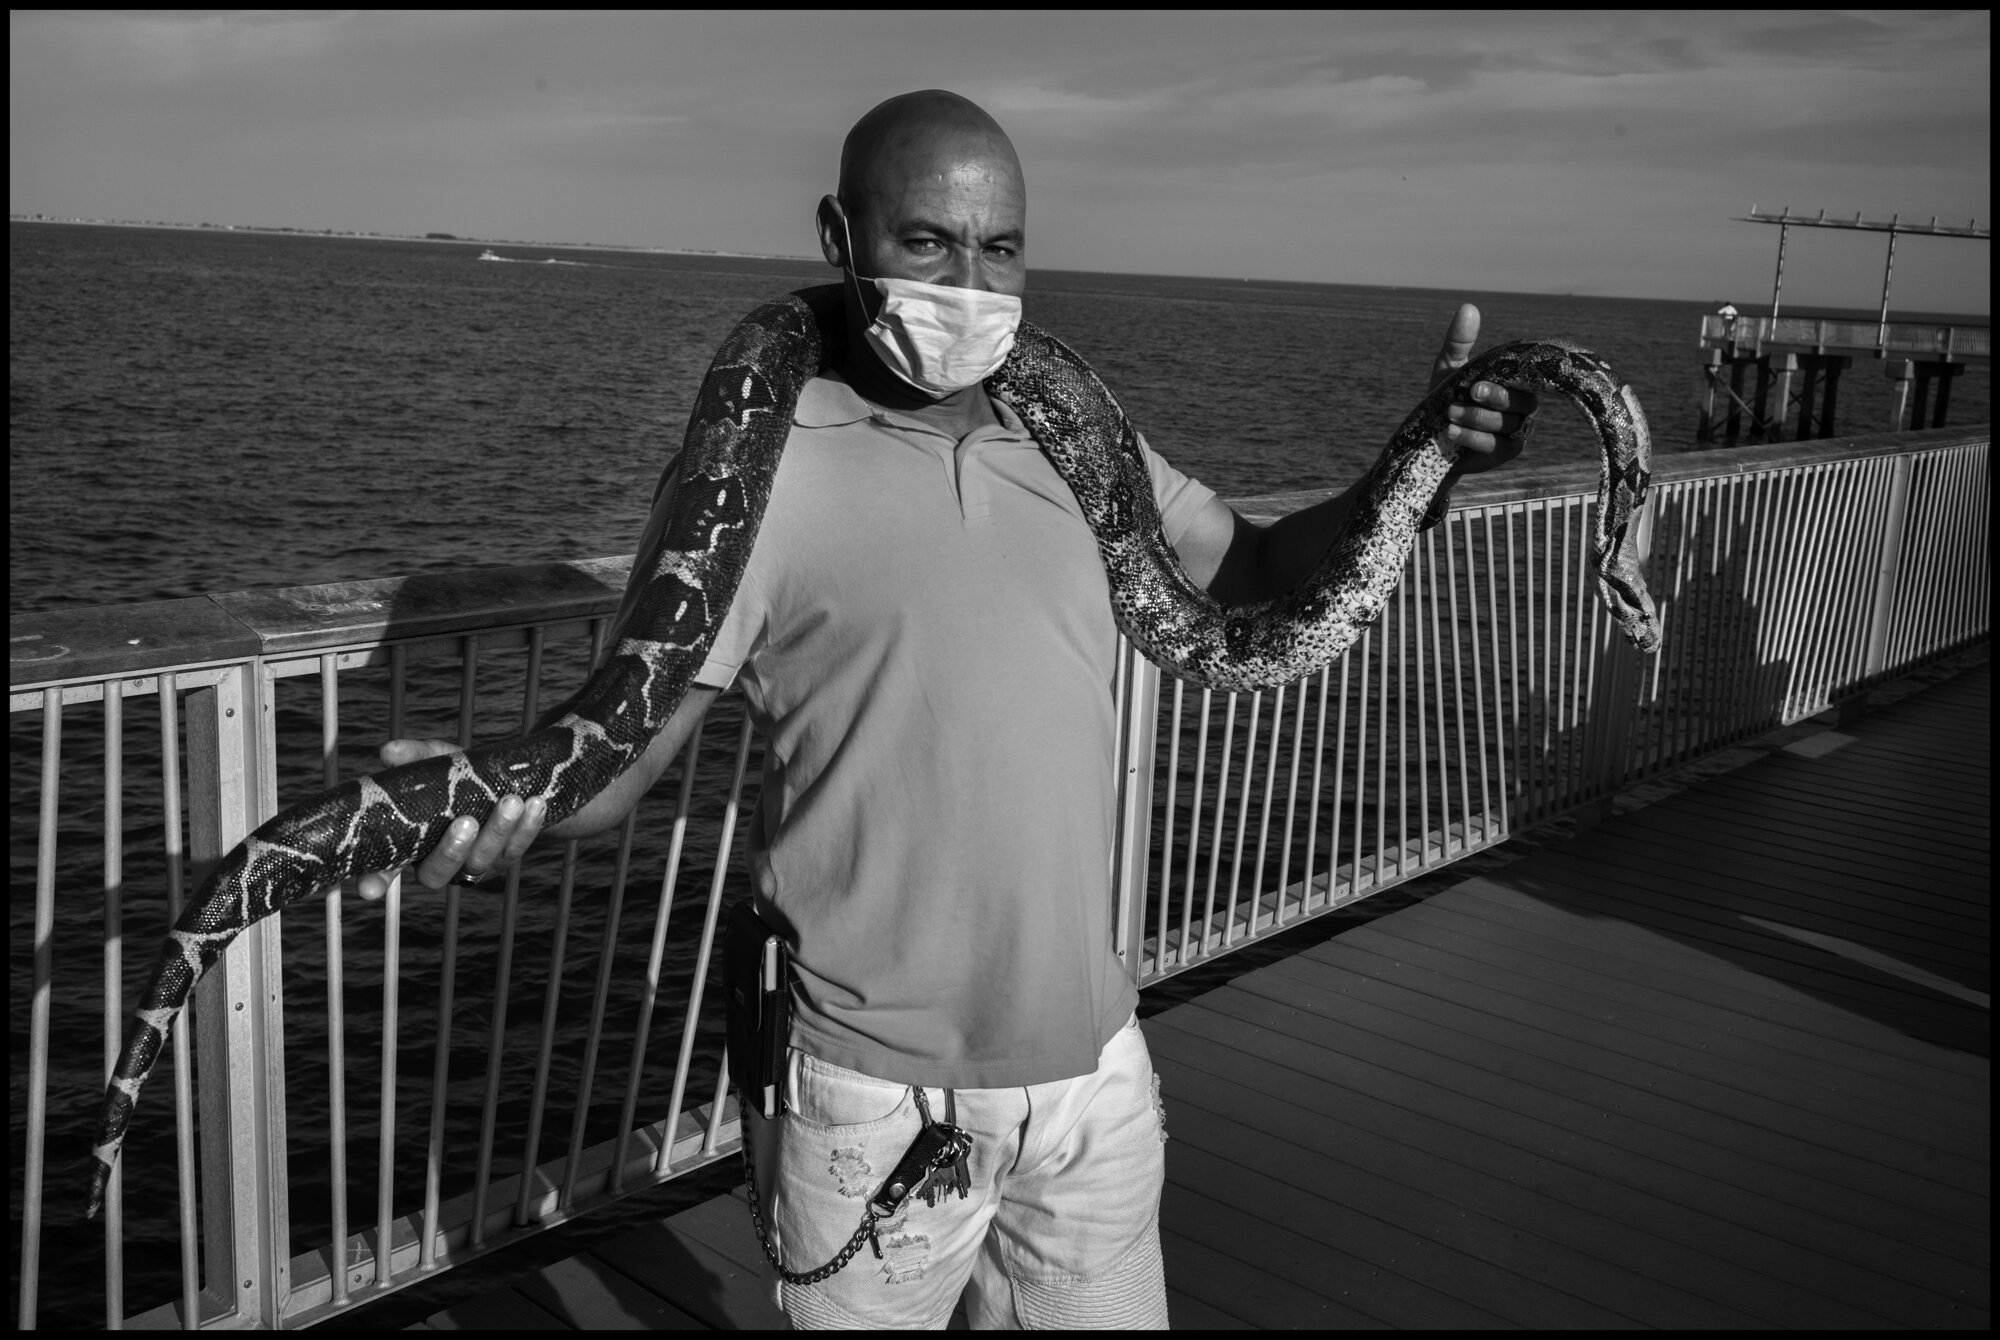  Alberto wearing a mask is now back at Coney Island with his python. Coney Island, New York.  May 16, 2020. © Peter Turnley.  ID# 49-014 